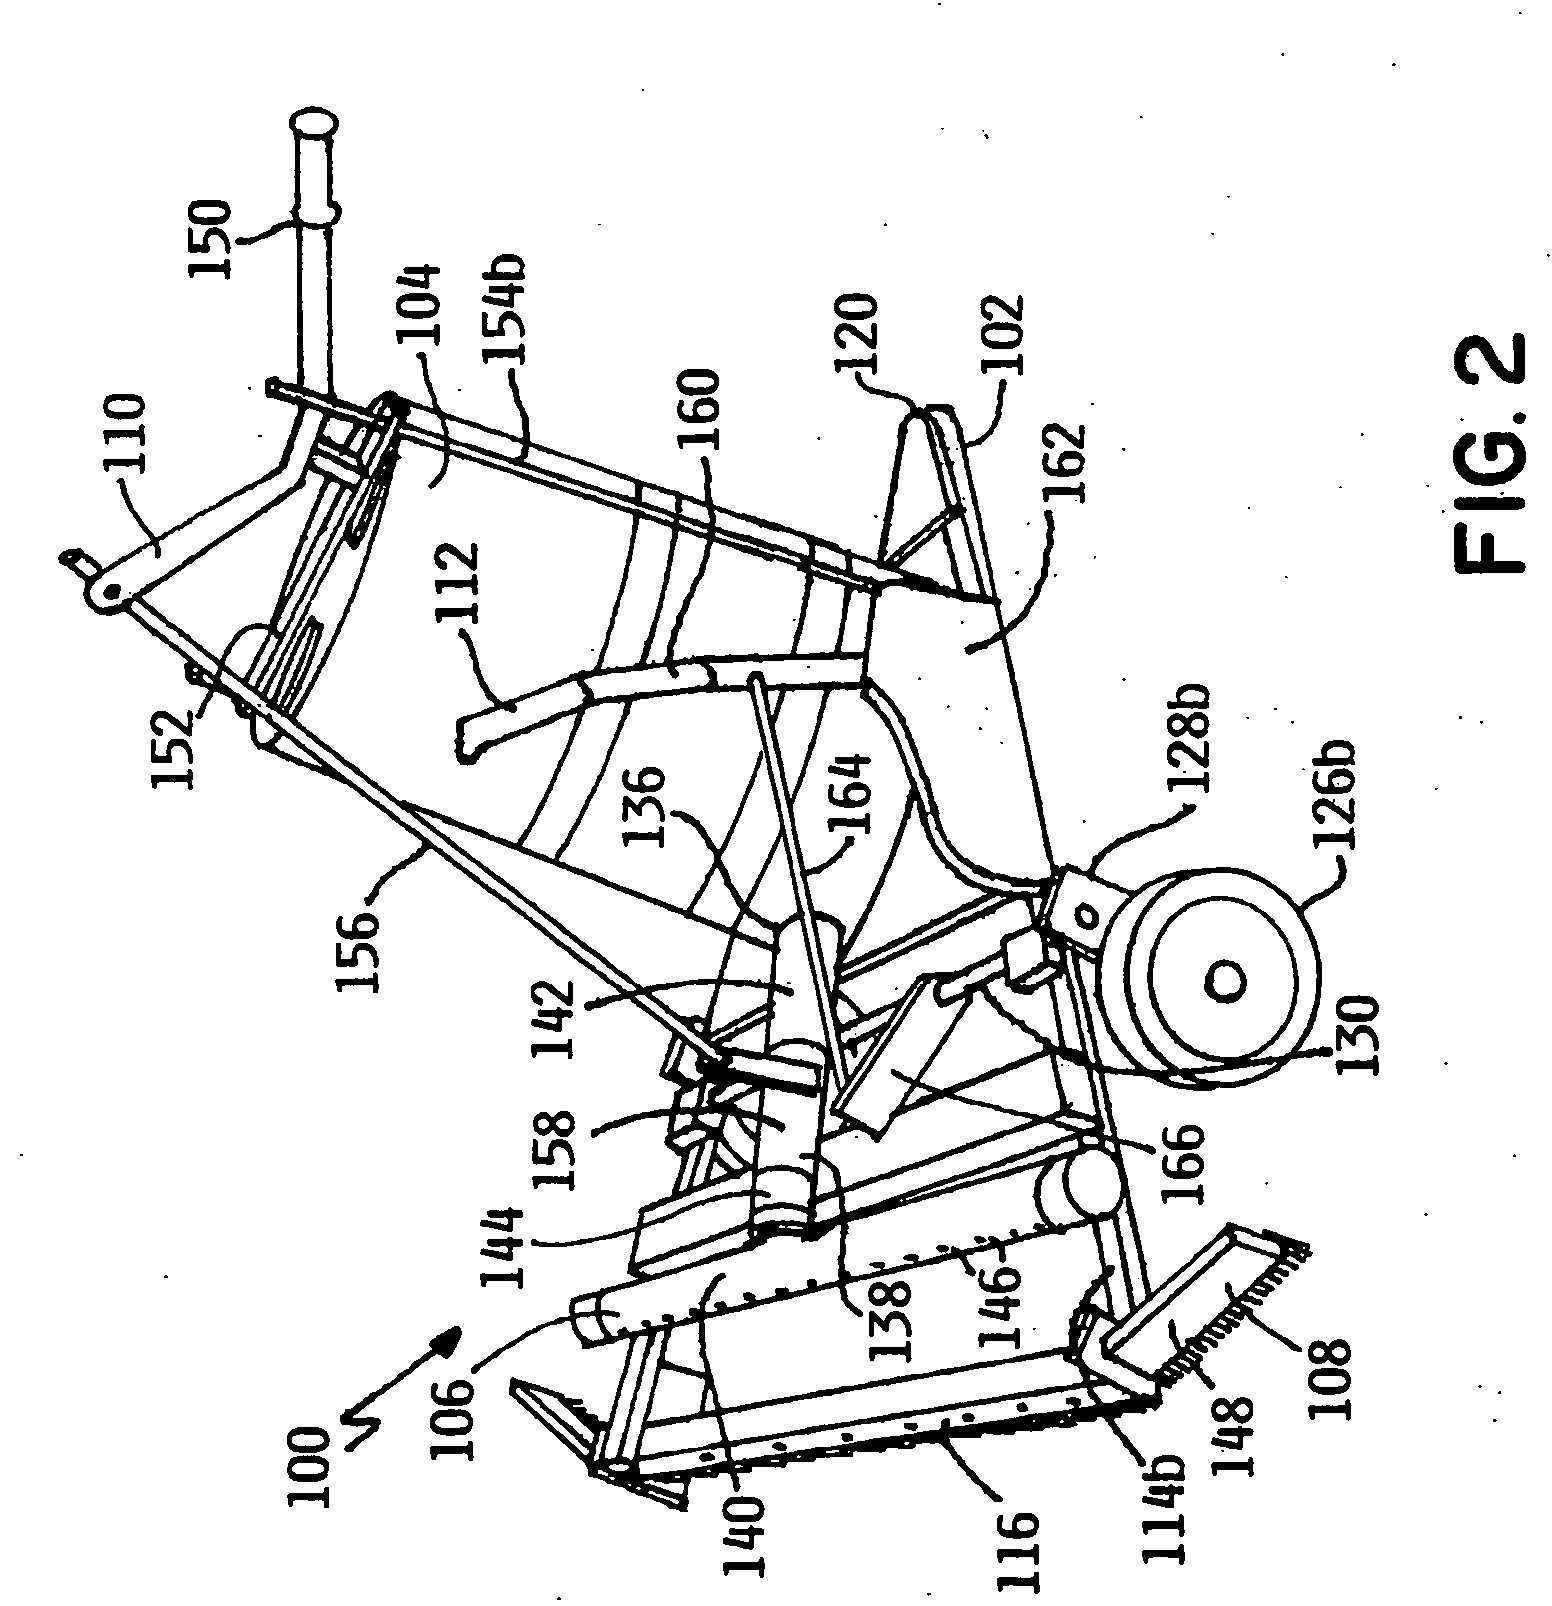 Residential sealcoating machine having cleanable manifold